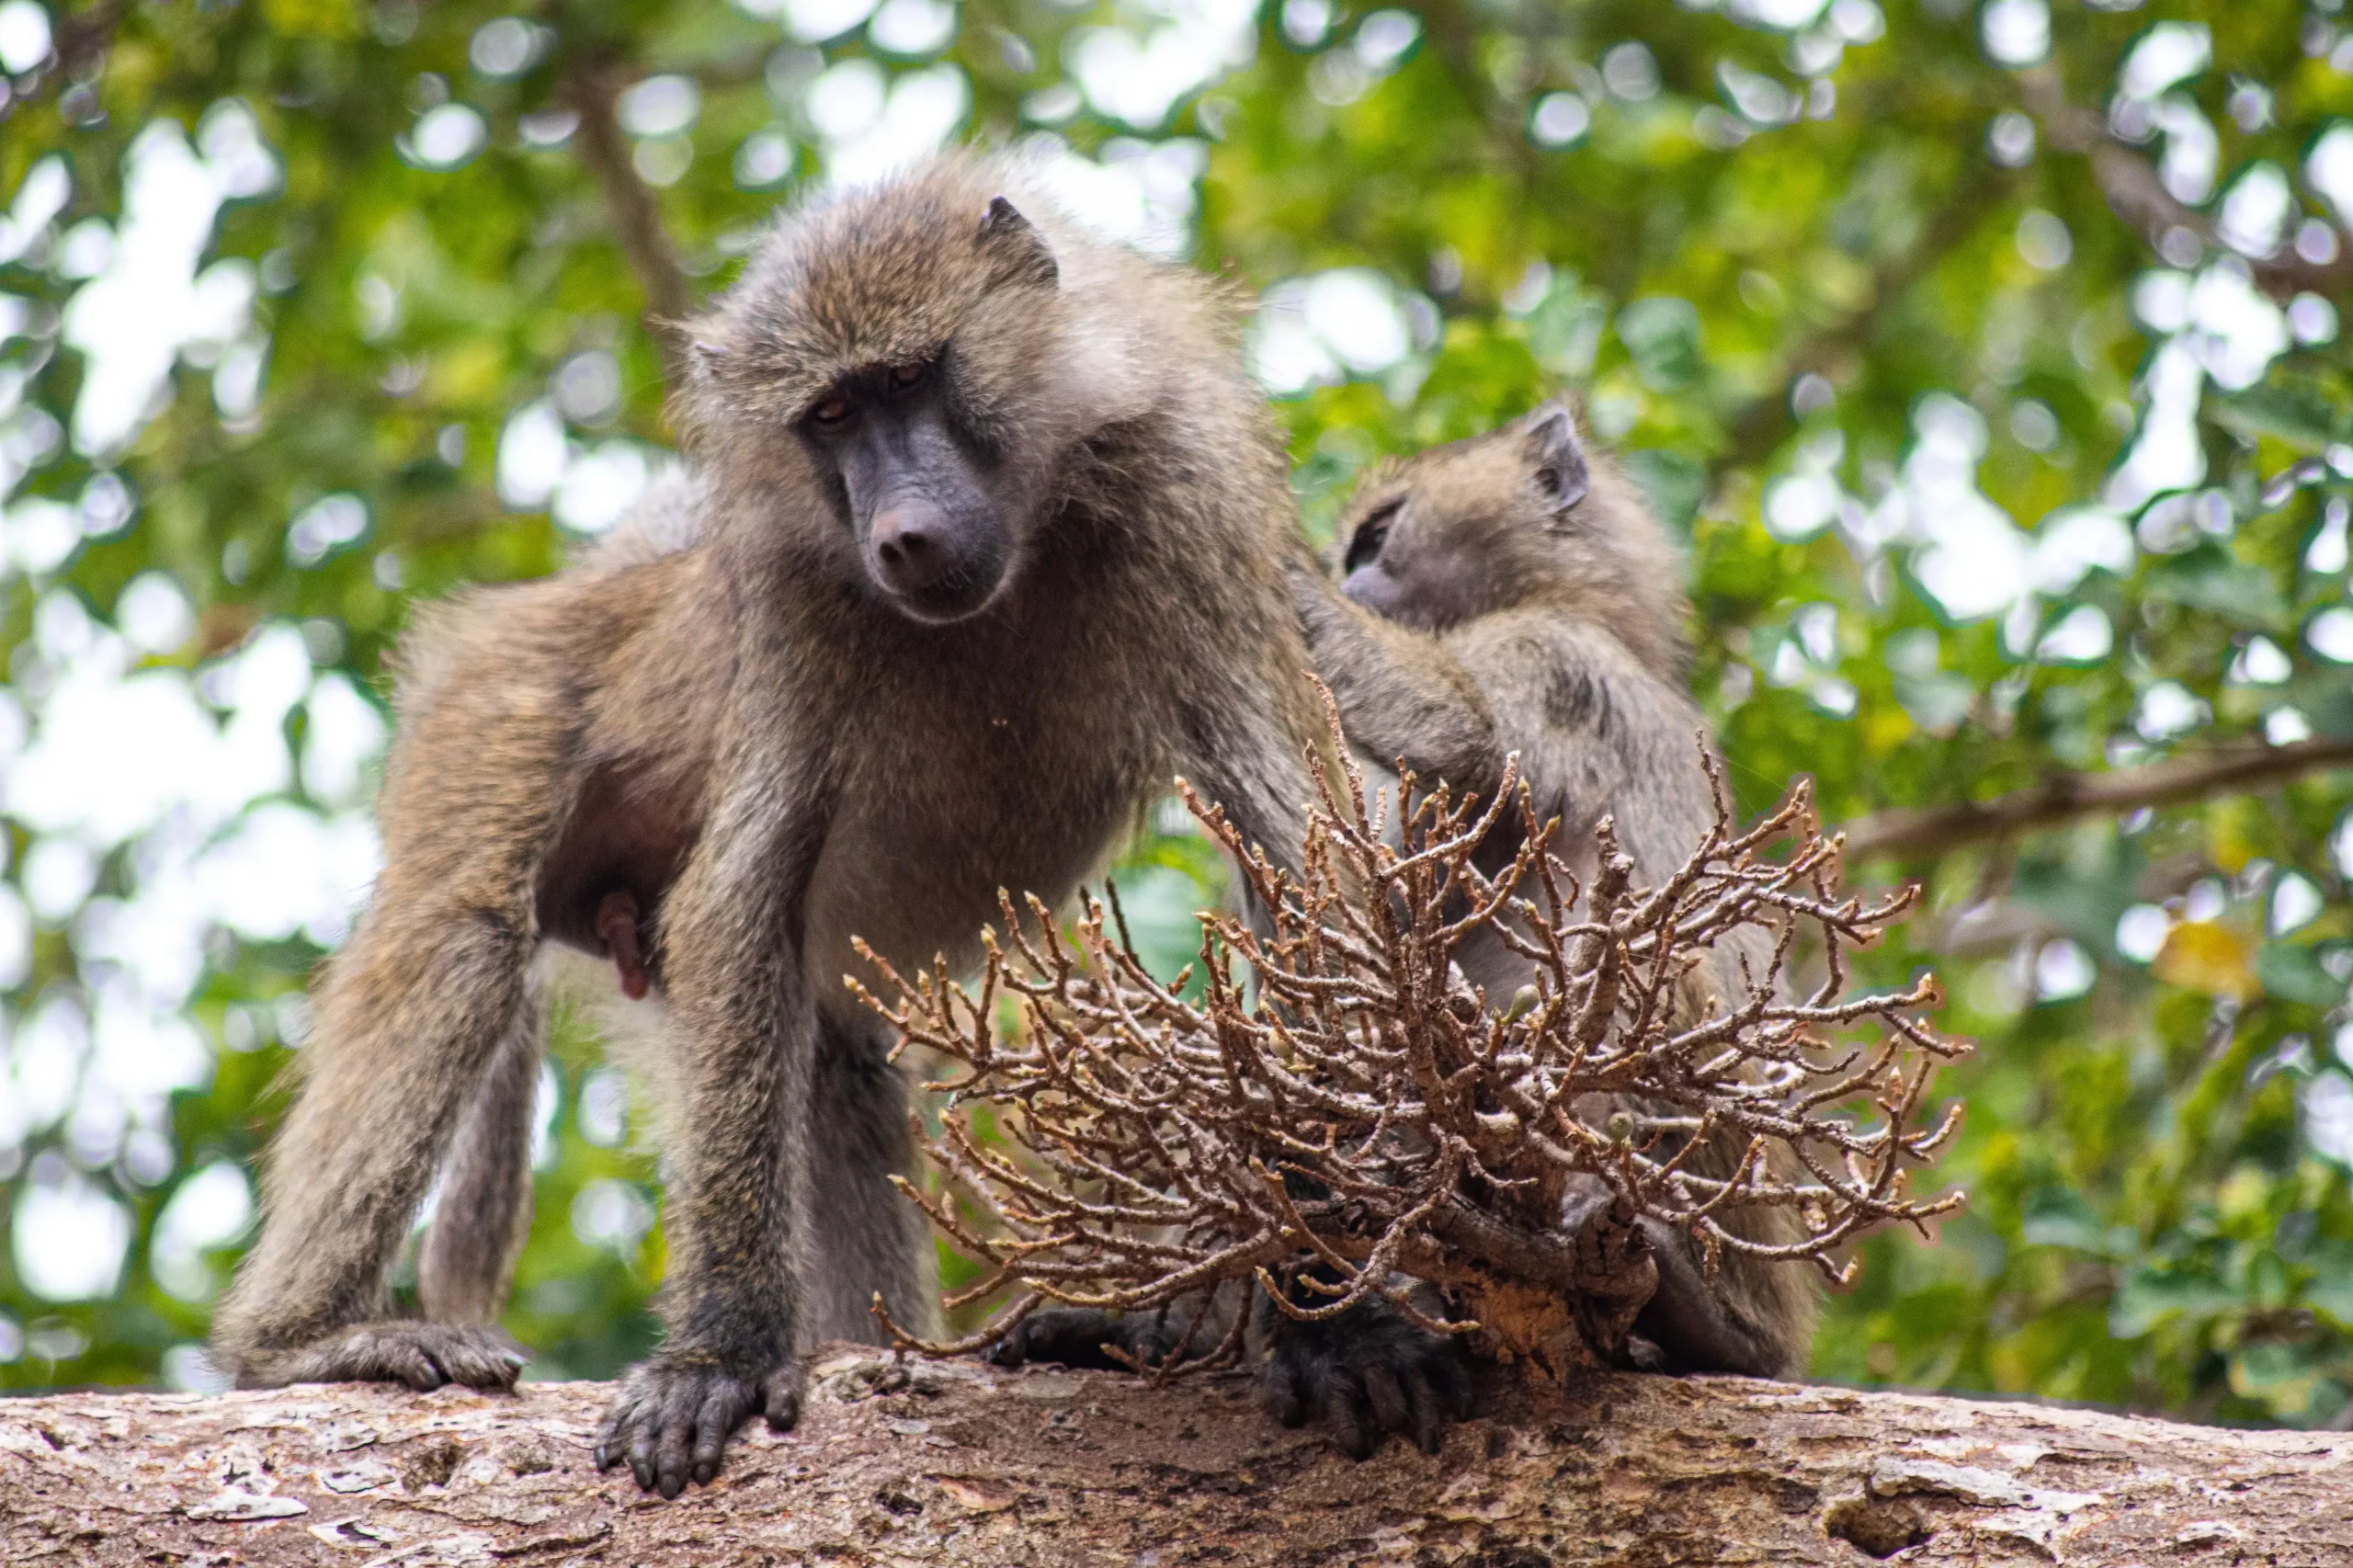 olive baboons spotted while trekking Kilimanjaro